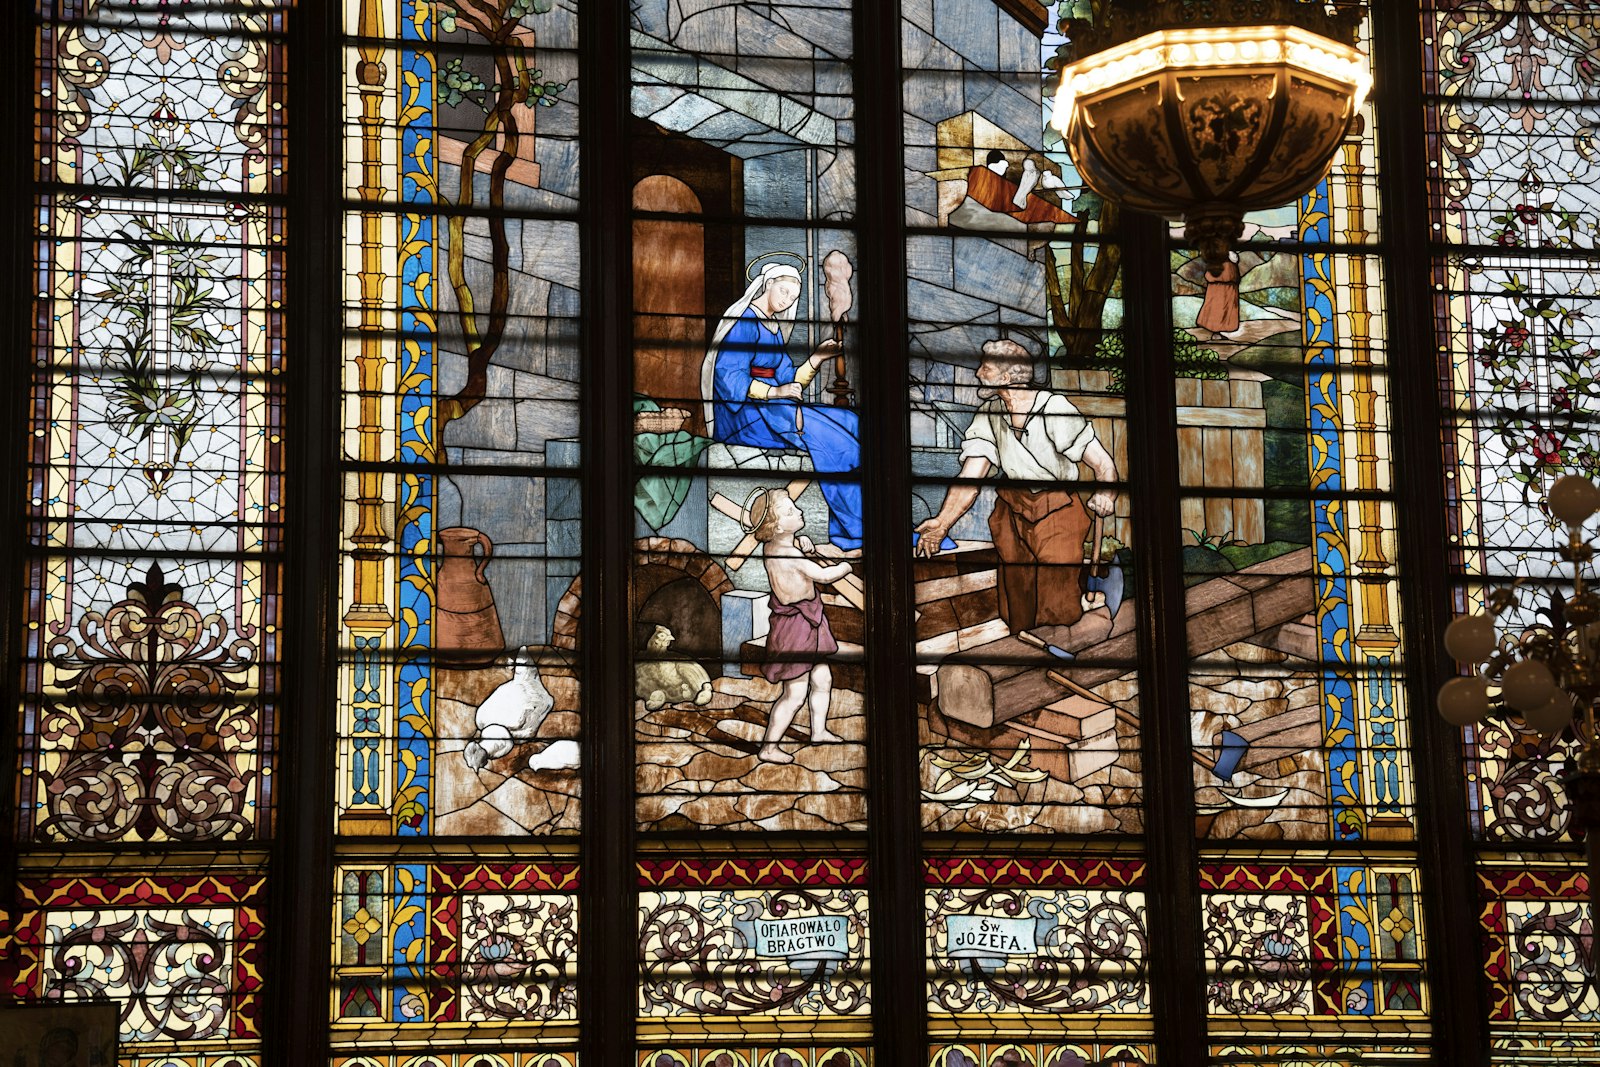 A large stained-glass window depicting the Holy Family, which won the first-place grand prize at the World's Fair in 1893, is one of the most recognizable parts of Sweetest Heart of Mary Church.